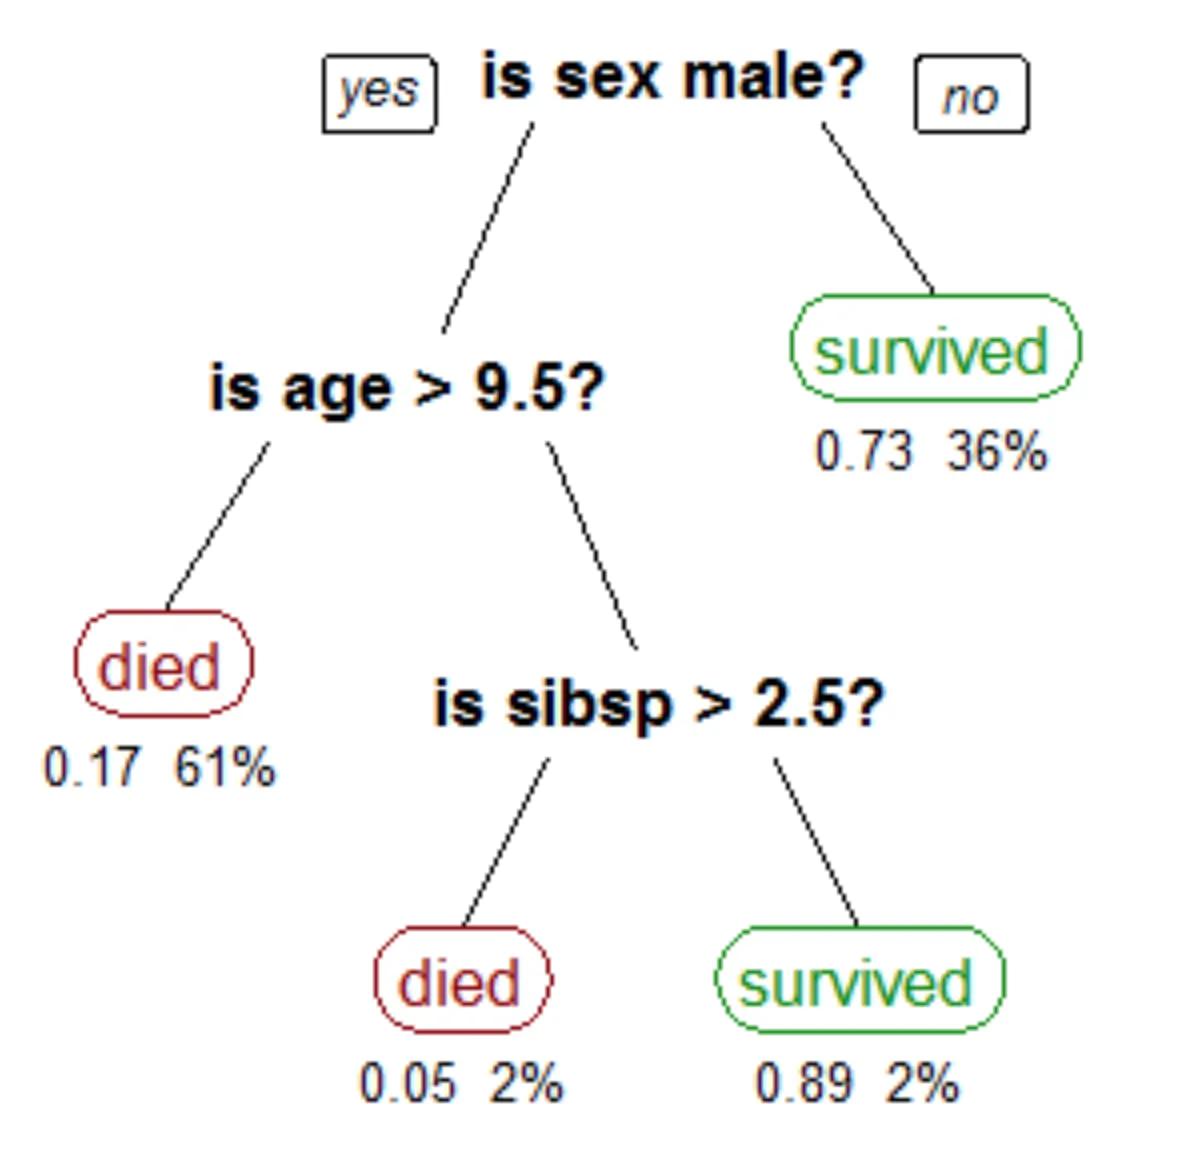 Decision tree example from Titanic survival rates